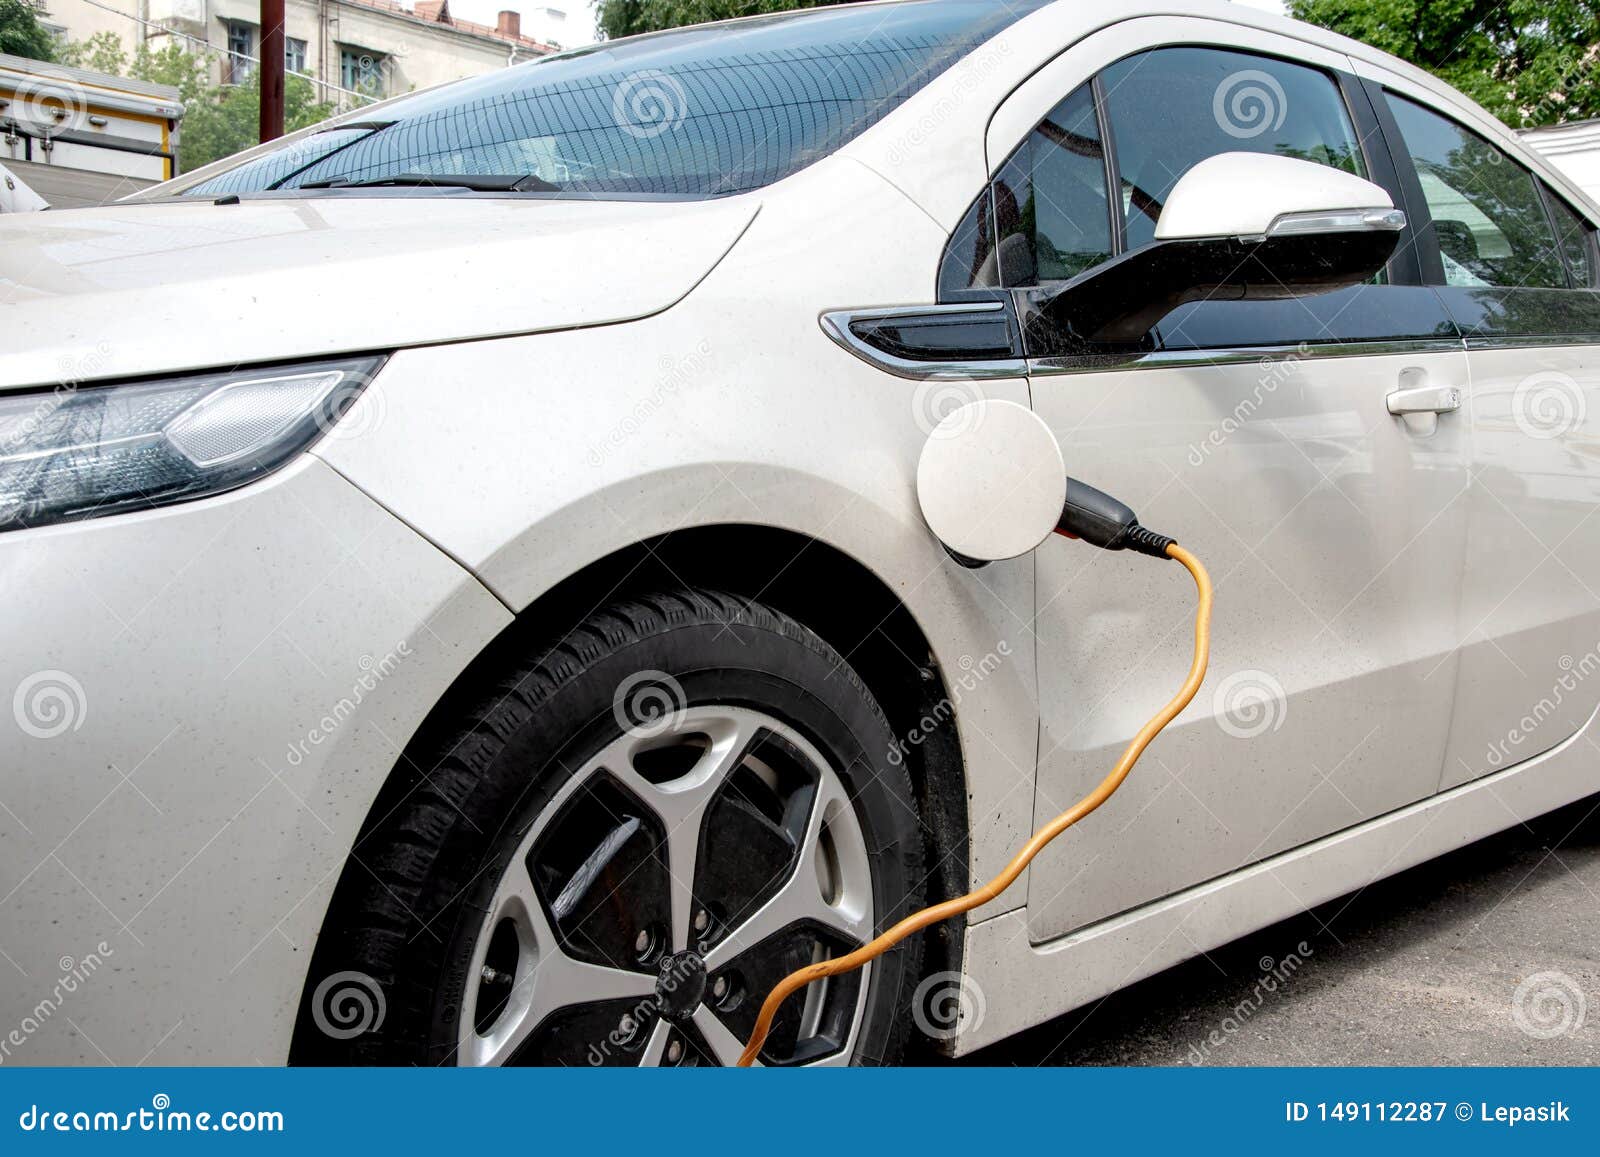 the electric car is charged from the mains, the cable from the charging station